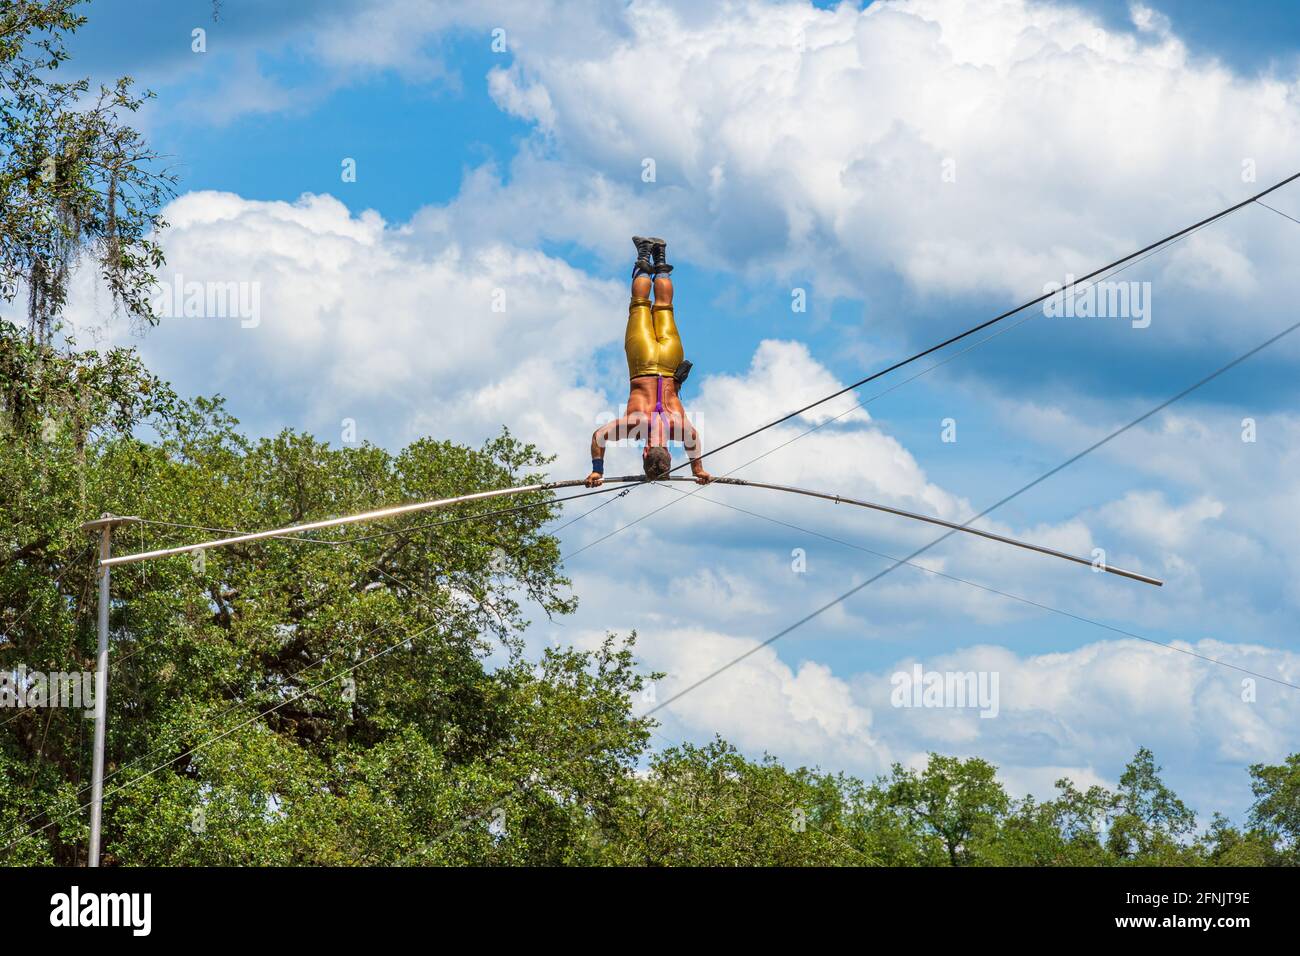 The Great Blake Wallenda performs a headstrand on a highwire without a safety net at the Bay Area Renaissance Festival - Withlacoochee River Park, Dad Stock Photo